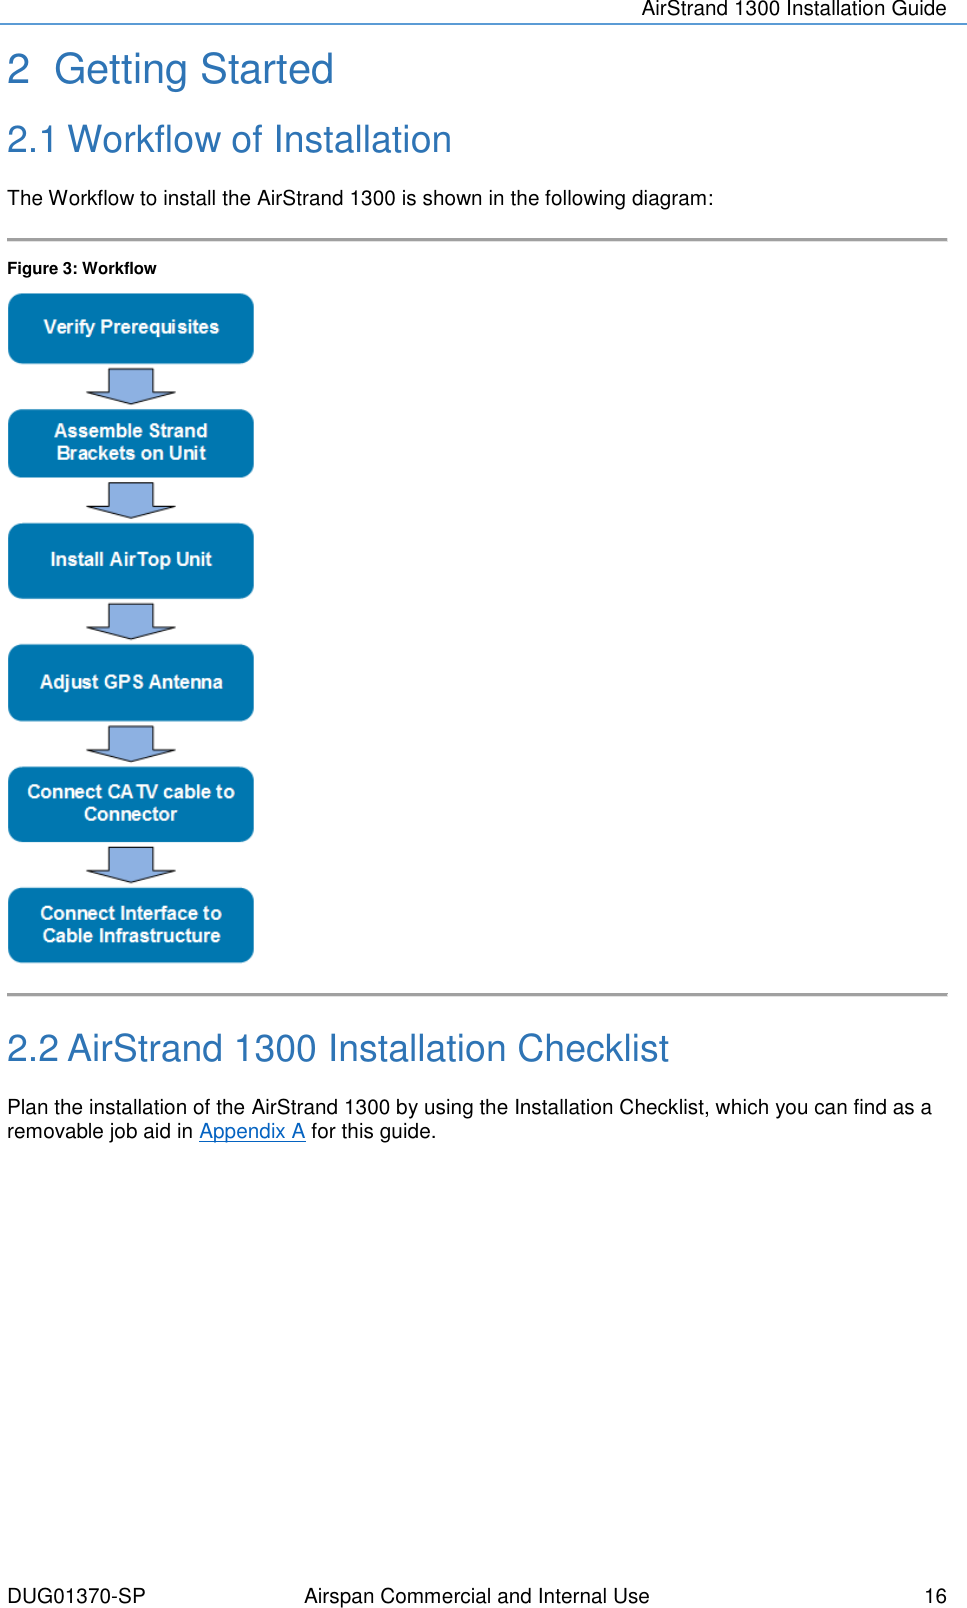 AirStrand 1300 Installation Guide  DUG01370-SP Airspan Commercial and Internal Use  16 2  Getting Started 2.1 Workflow of Installation The Workflow to install the AirStrand 1300 is shown in the following diagram:   Figure 3: Workflow   2.2 AirStrand 1300 Installation Checklist Plan the installation of the AirStrand 1300 by using the Installation Checklist, which you can find as a removable job aid in Appendix A for this guide.    